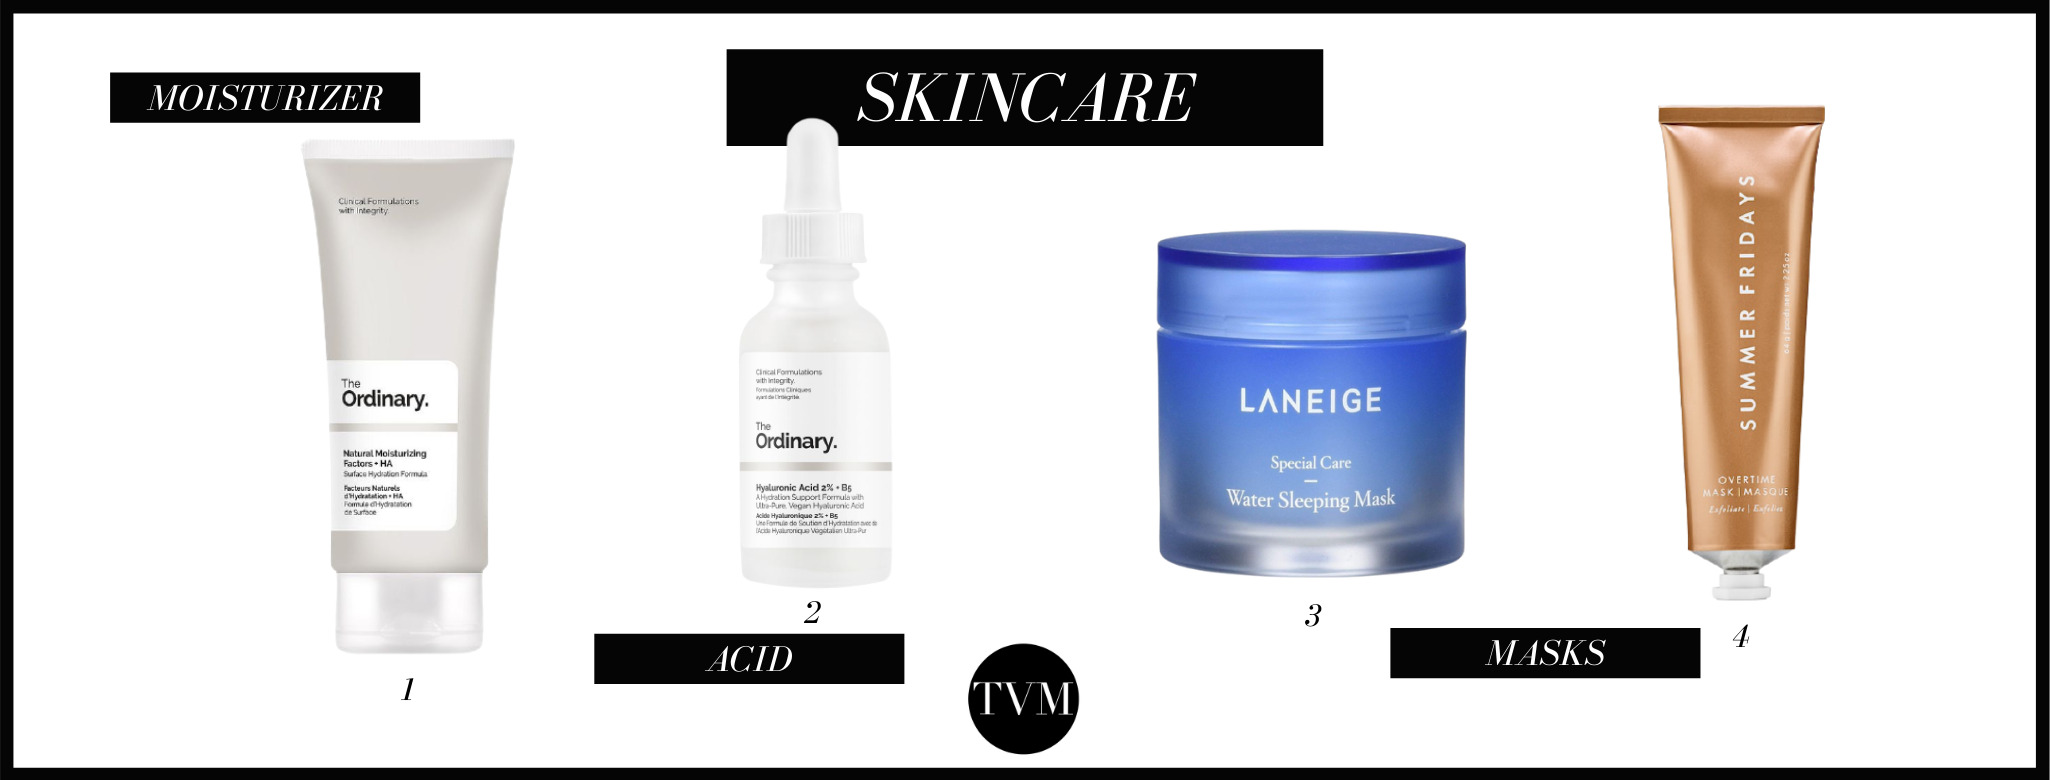 When it comes to skincare, these are the key products that you should have in your collection. However, keep in mind that you need some primary products like micellar water to clean your face and removing makeup. If you want to know more about cleansers that you should incorporate in your skincare routine, check out our article on - HOW TO DETOX YOUR SKIN IN 5 STEPS Our first recommendation is a moisturizer - Moisturizing is vital! Our favorite is this one (1) from The Ordinary is absolutely amazing and super affordable. The Ordinary is a skincare brand with a variety of skincare products that are super effective and budget-friendly. We totally recommend it - here at TVM headquarters, everyone loves this brand! In case, you want to know more about this brand, check out our article named -THE ORDINARY ULTIMATE GUIDE!  To better hydrate, your skin it would be excellent if you could introduce Hyaluronic acid in your routine! This one (2) is TERRIFIC! Once again, it is from The Ordinary! Did you notice that we absolutely love this brand? This acid is perfect for restoring hydration and helps repair the skin barrier - Overall excellent! Because we all love those self-care days - we had to incorporate 2 masks in this edit of 15 Beauty Must-Haves. Both numbers 3 and 4 are great! These products are super effective and overnight masks which is always a plus! If you want to boost your hydration levels, number 3 is perfect! On the other hand, if you need an exfoliation intervention the Summer's Friday is the way to go! Either way, you will be covered. They are both fantastic!